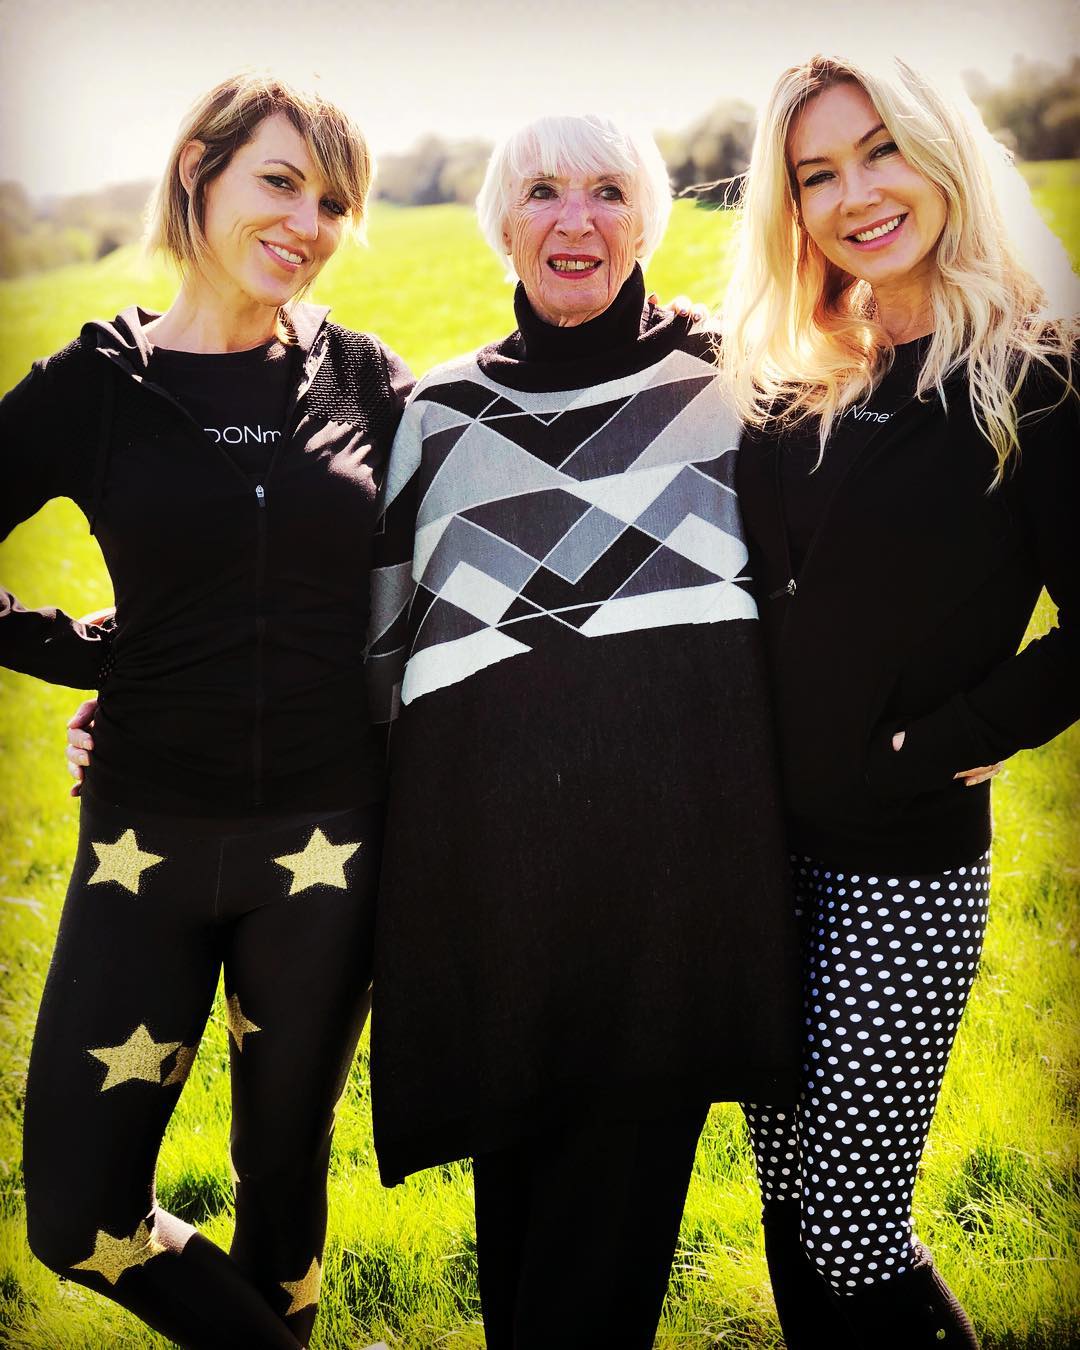 Kelly Wackerman, Esther Fairfax and Pamela Kennedy in Hungerford, England.